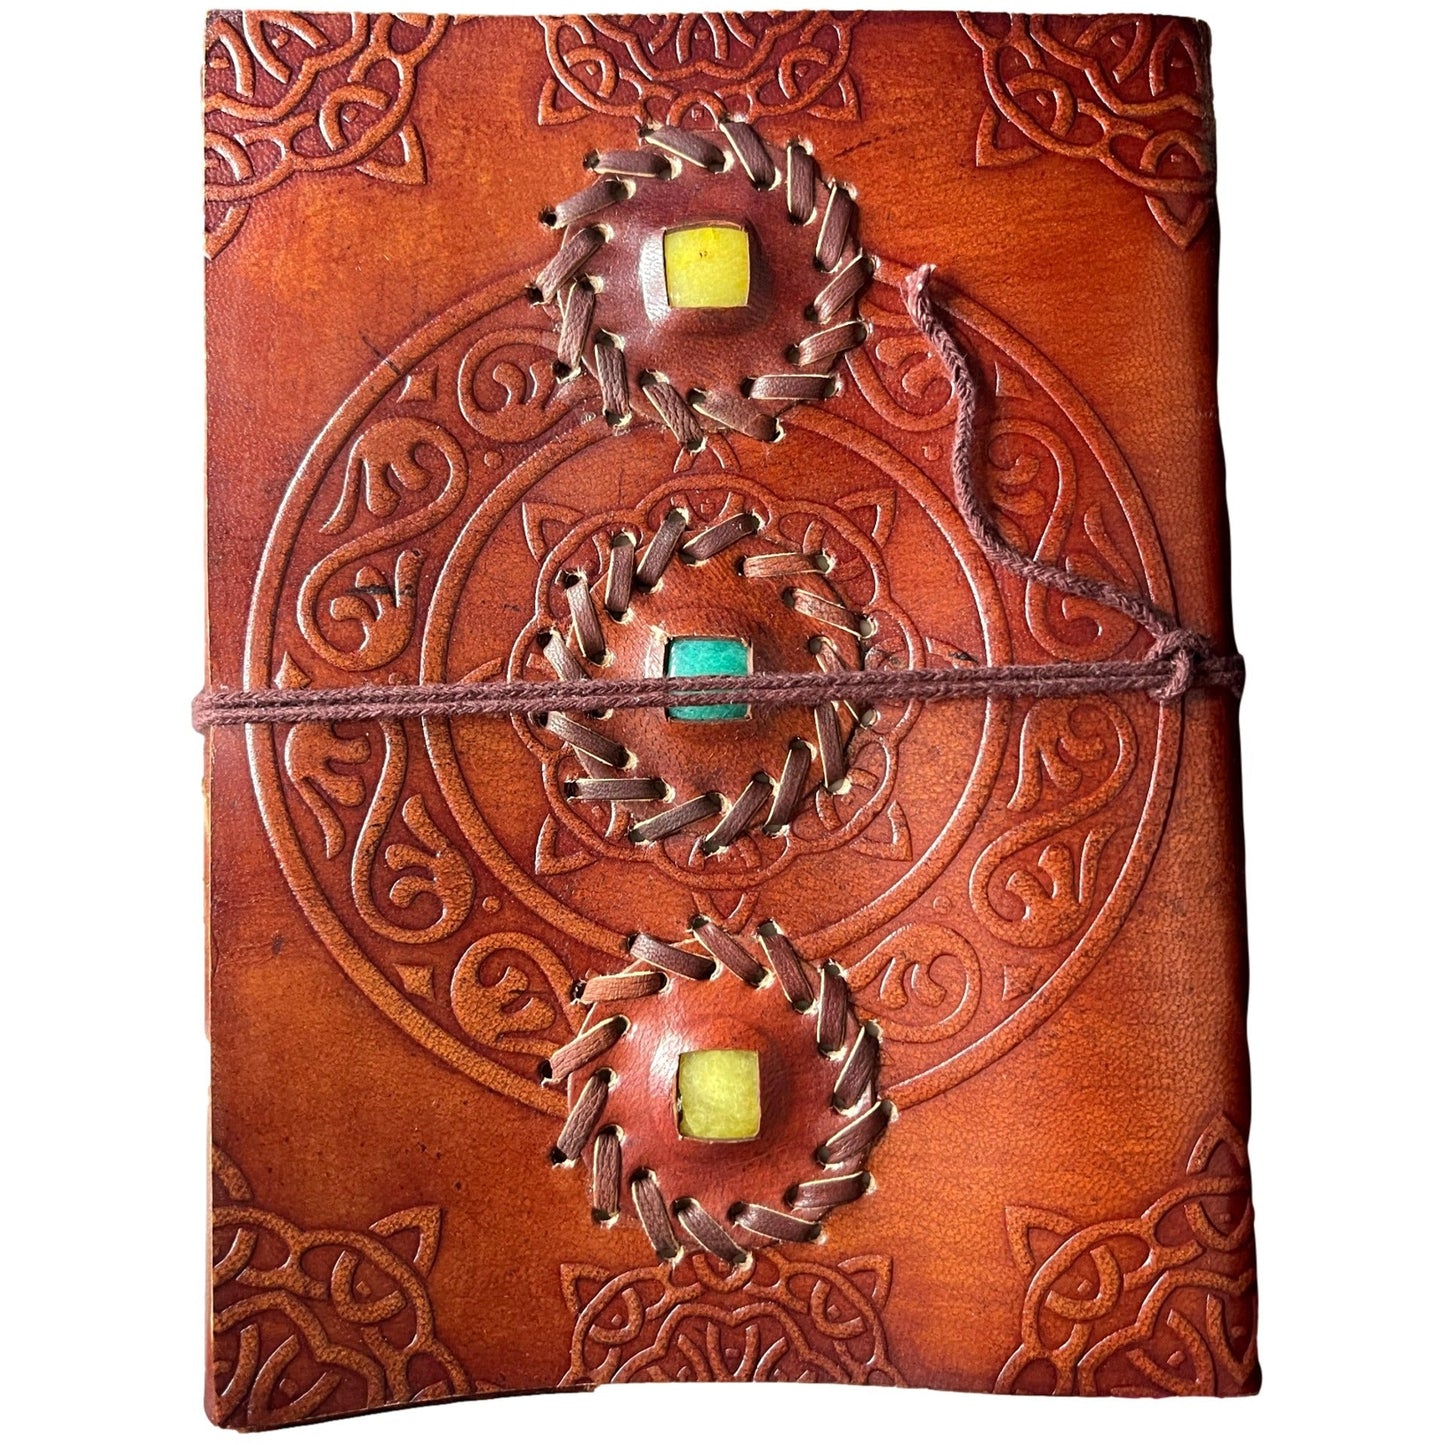 Leather Embroidered Journal Adorned with Gemstone Crystals & Leather String Closure